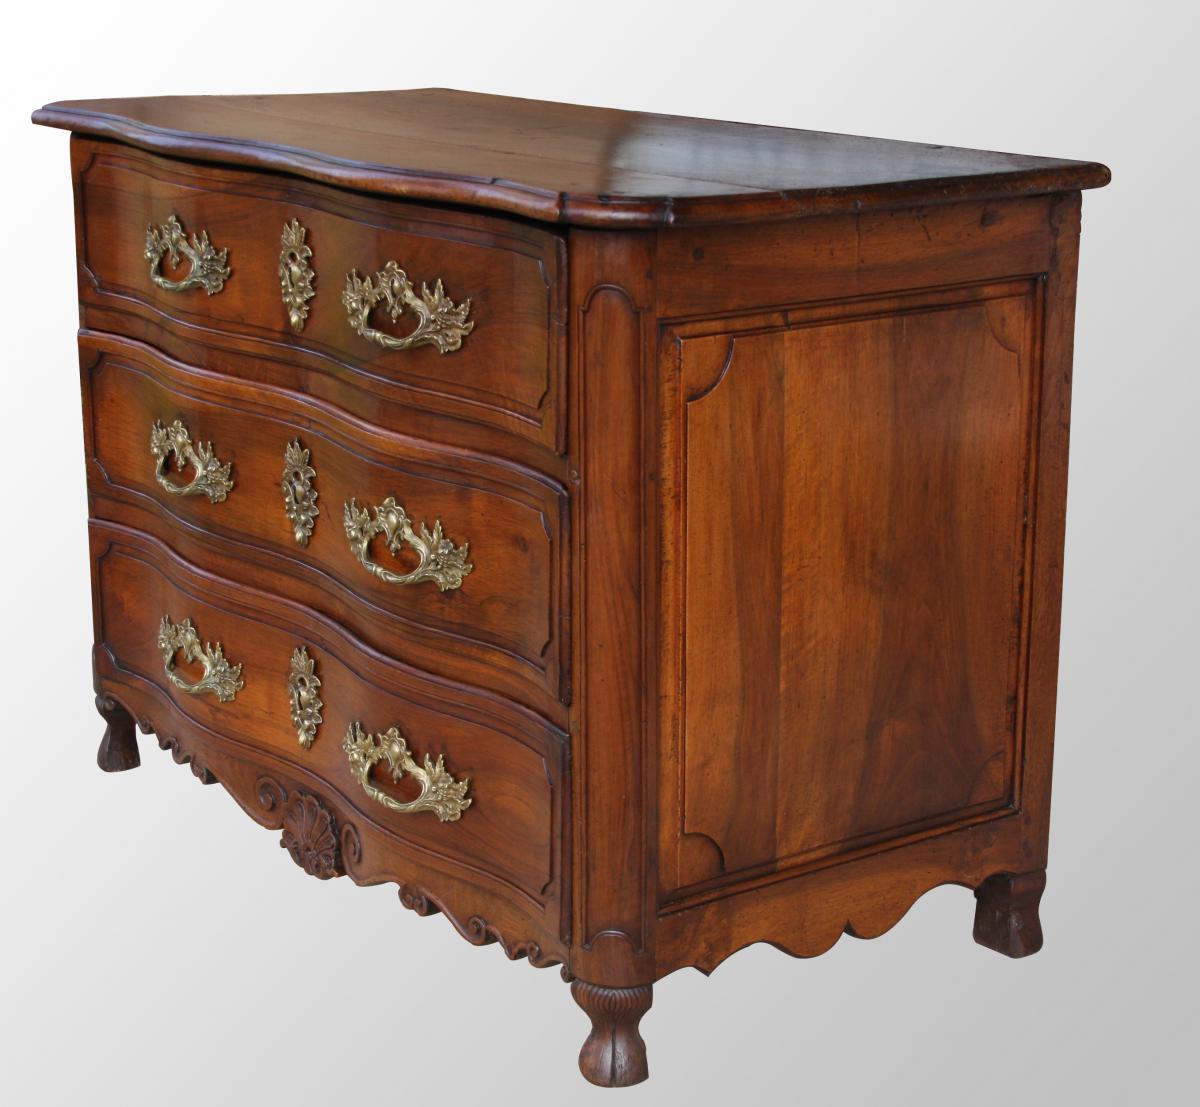  Beautiful Walnut Chest Of Drawers, 18th Century, France